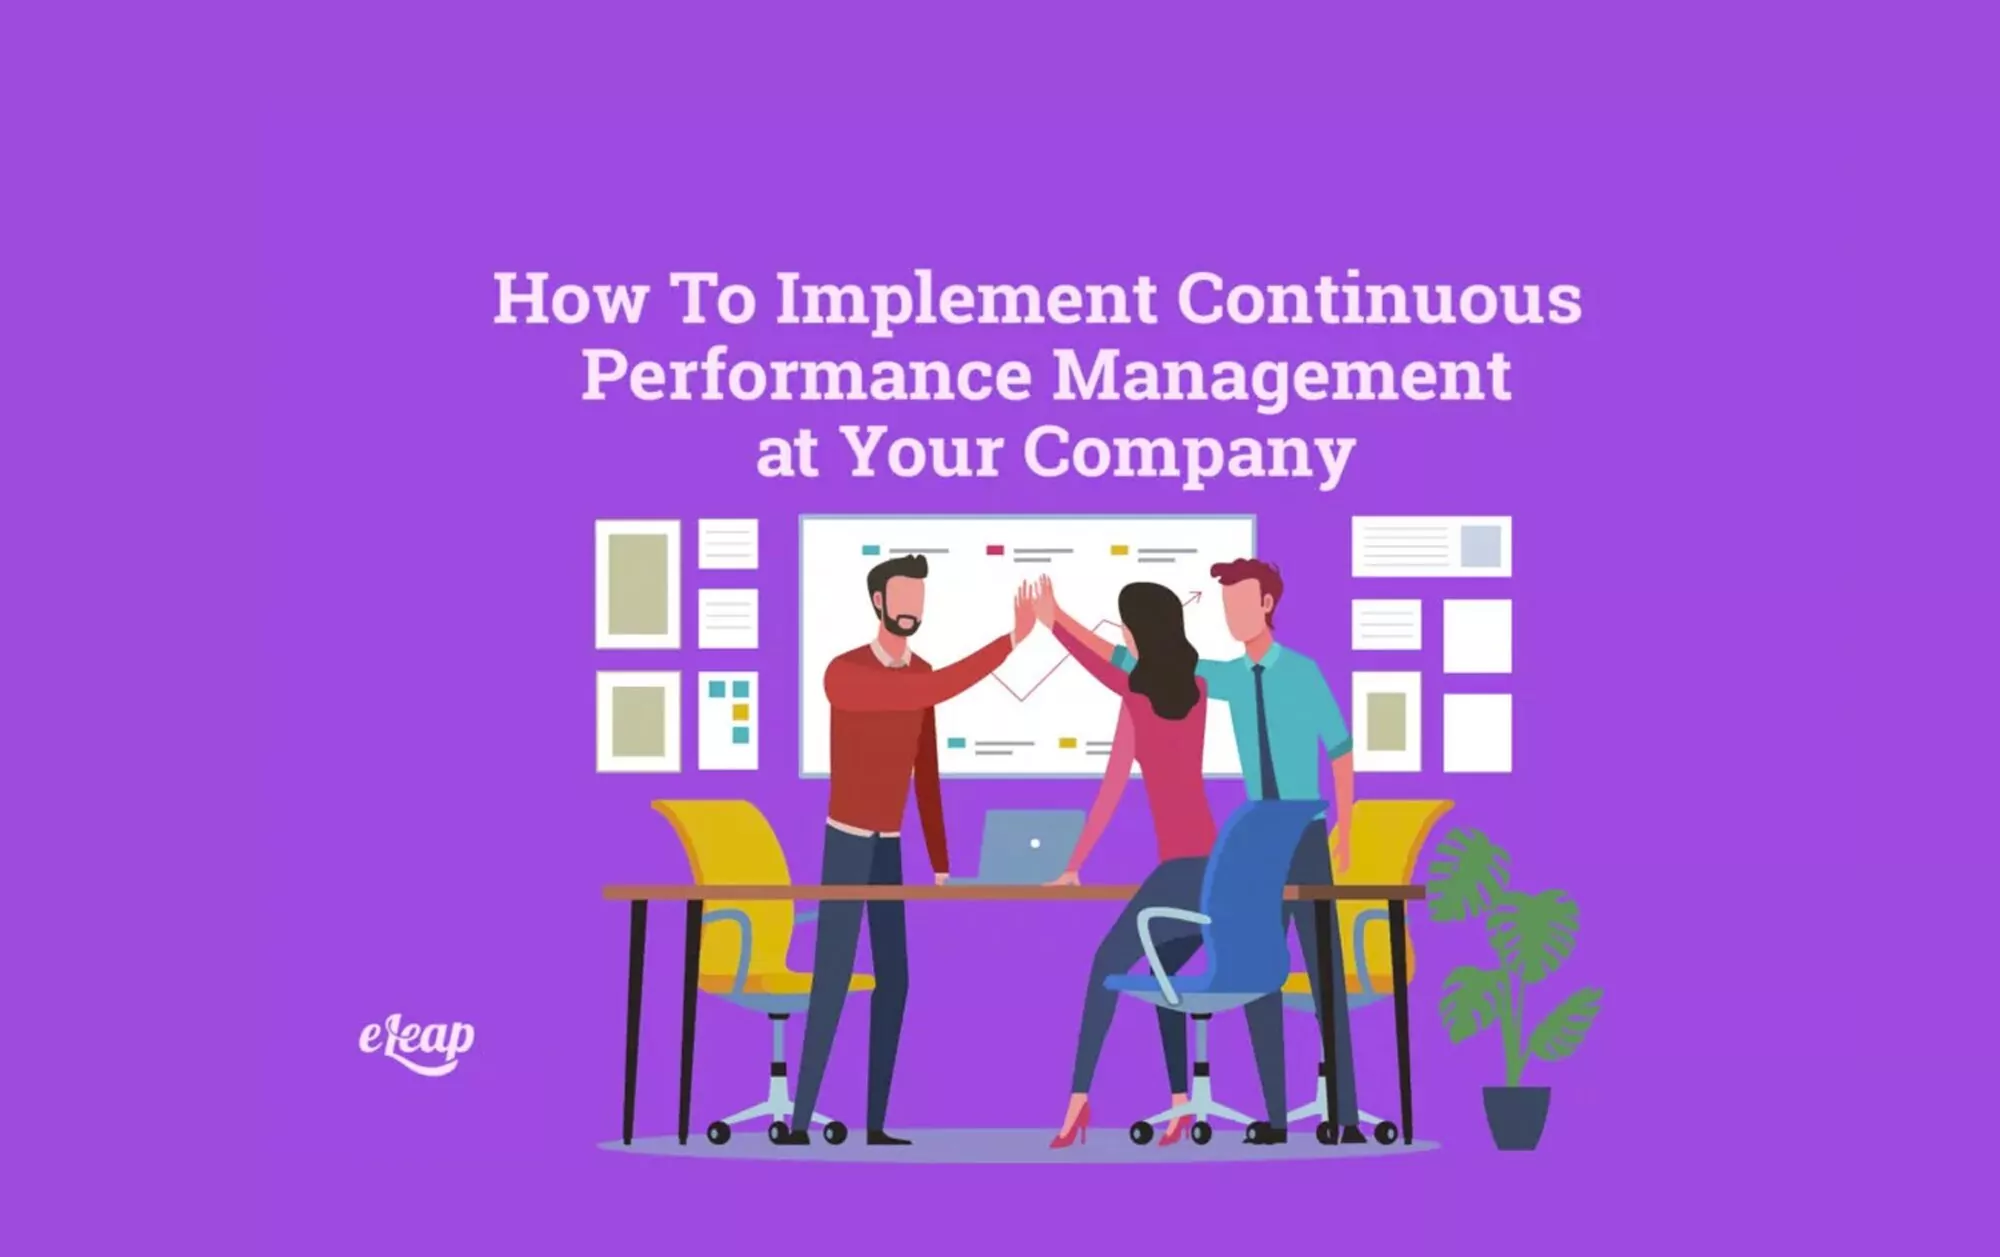 How To Implement Continuous Performance Management at Your Company